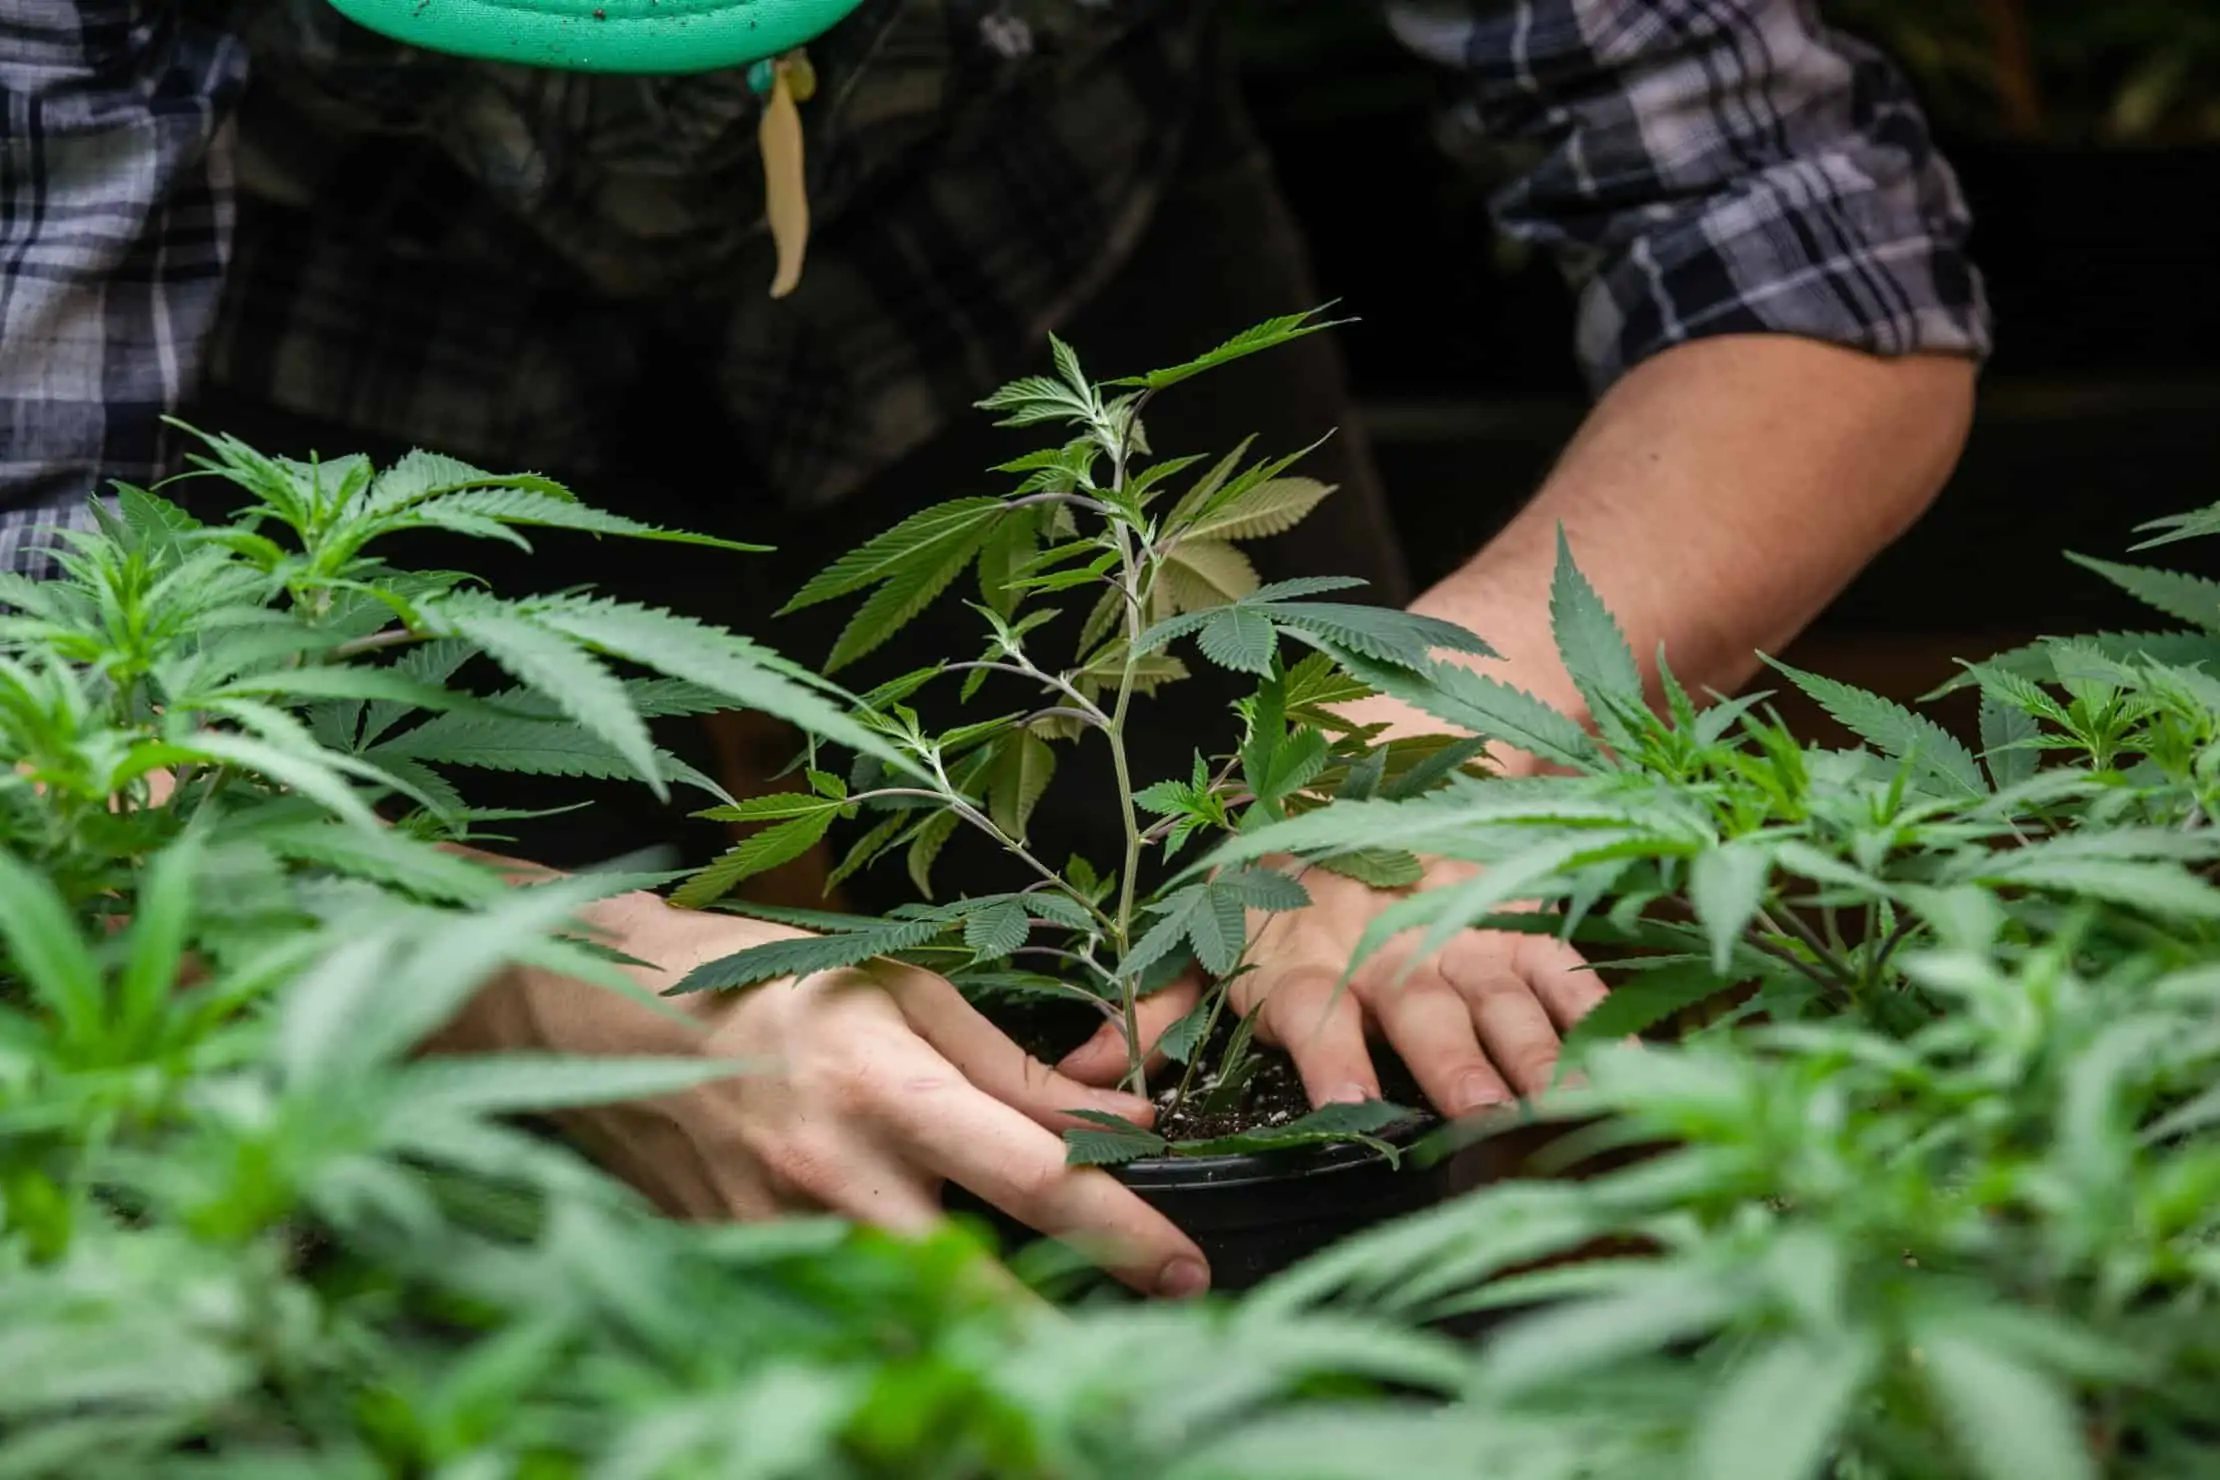 How To Win A Cannabis Cultivation License